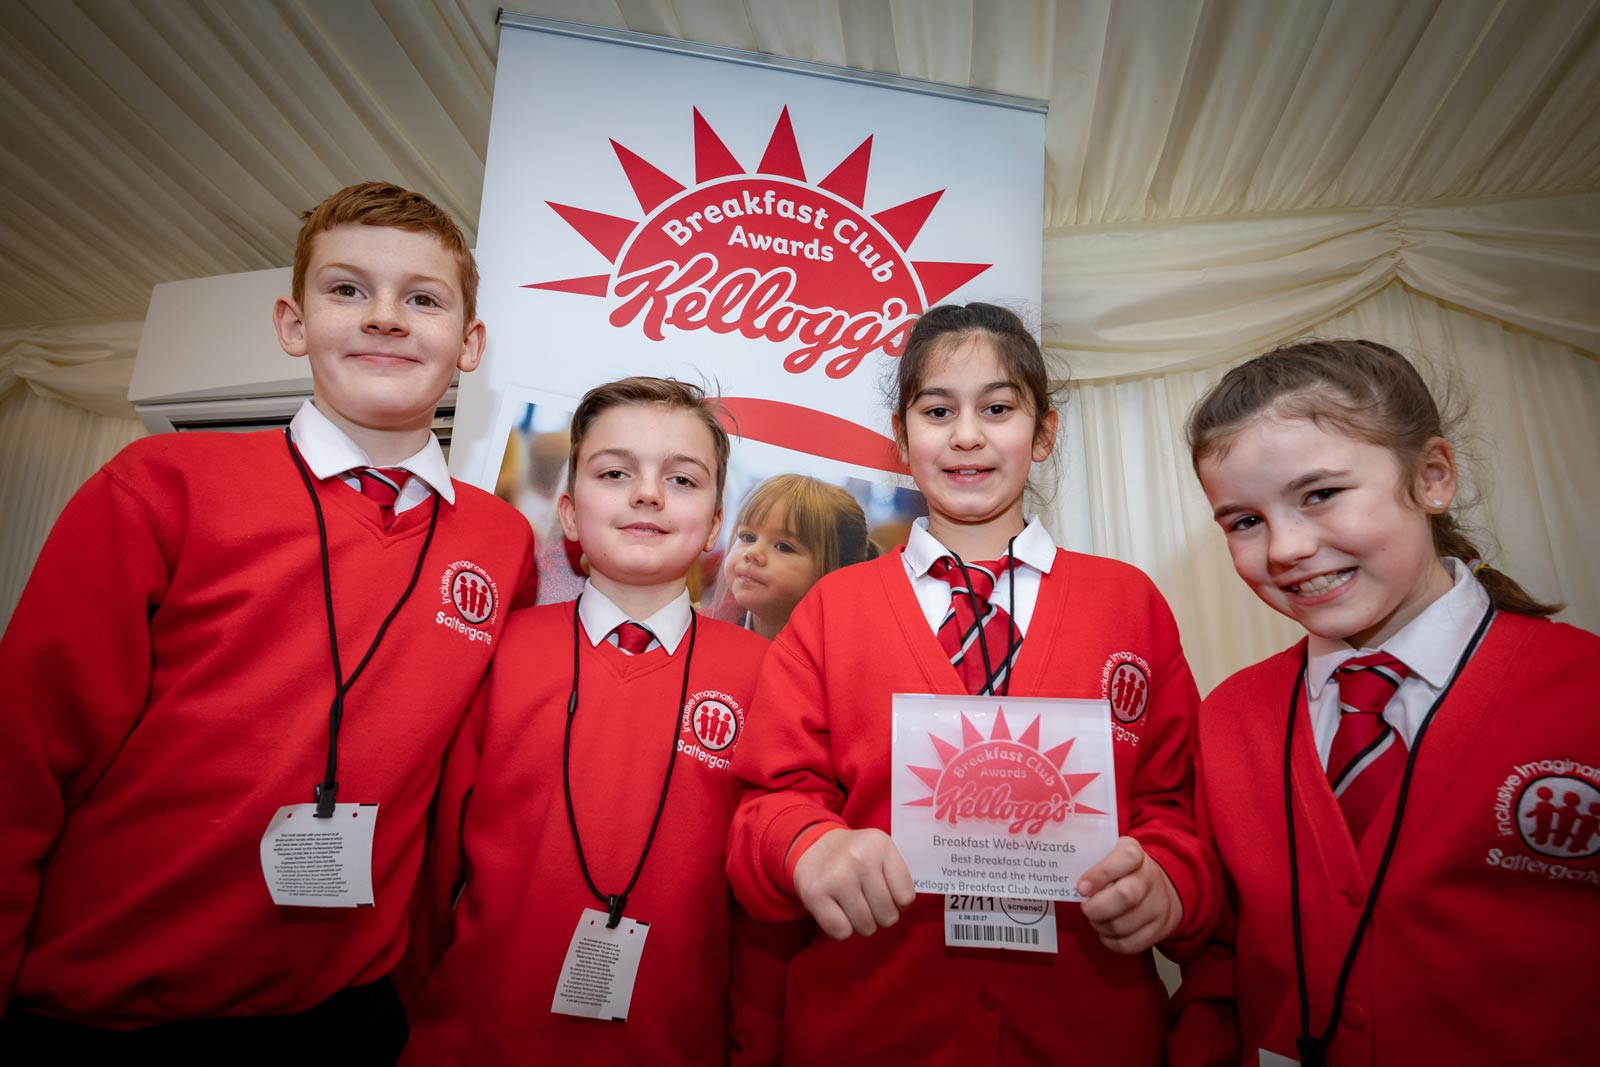 Saltergate Junior School breakfast club scooped the regional crown and cash prize of £1,000